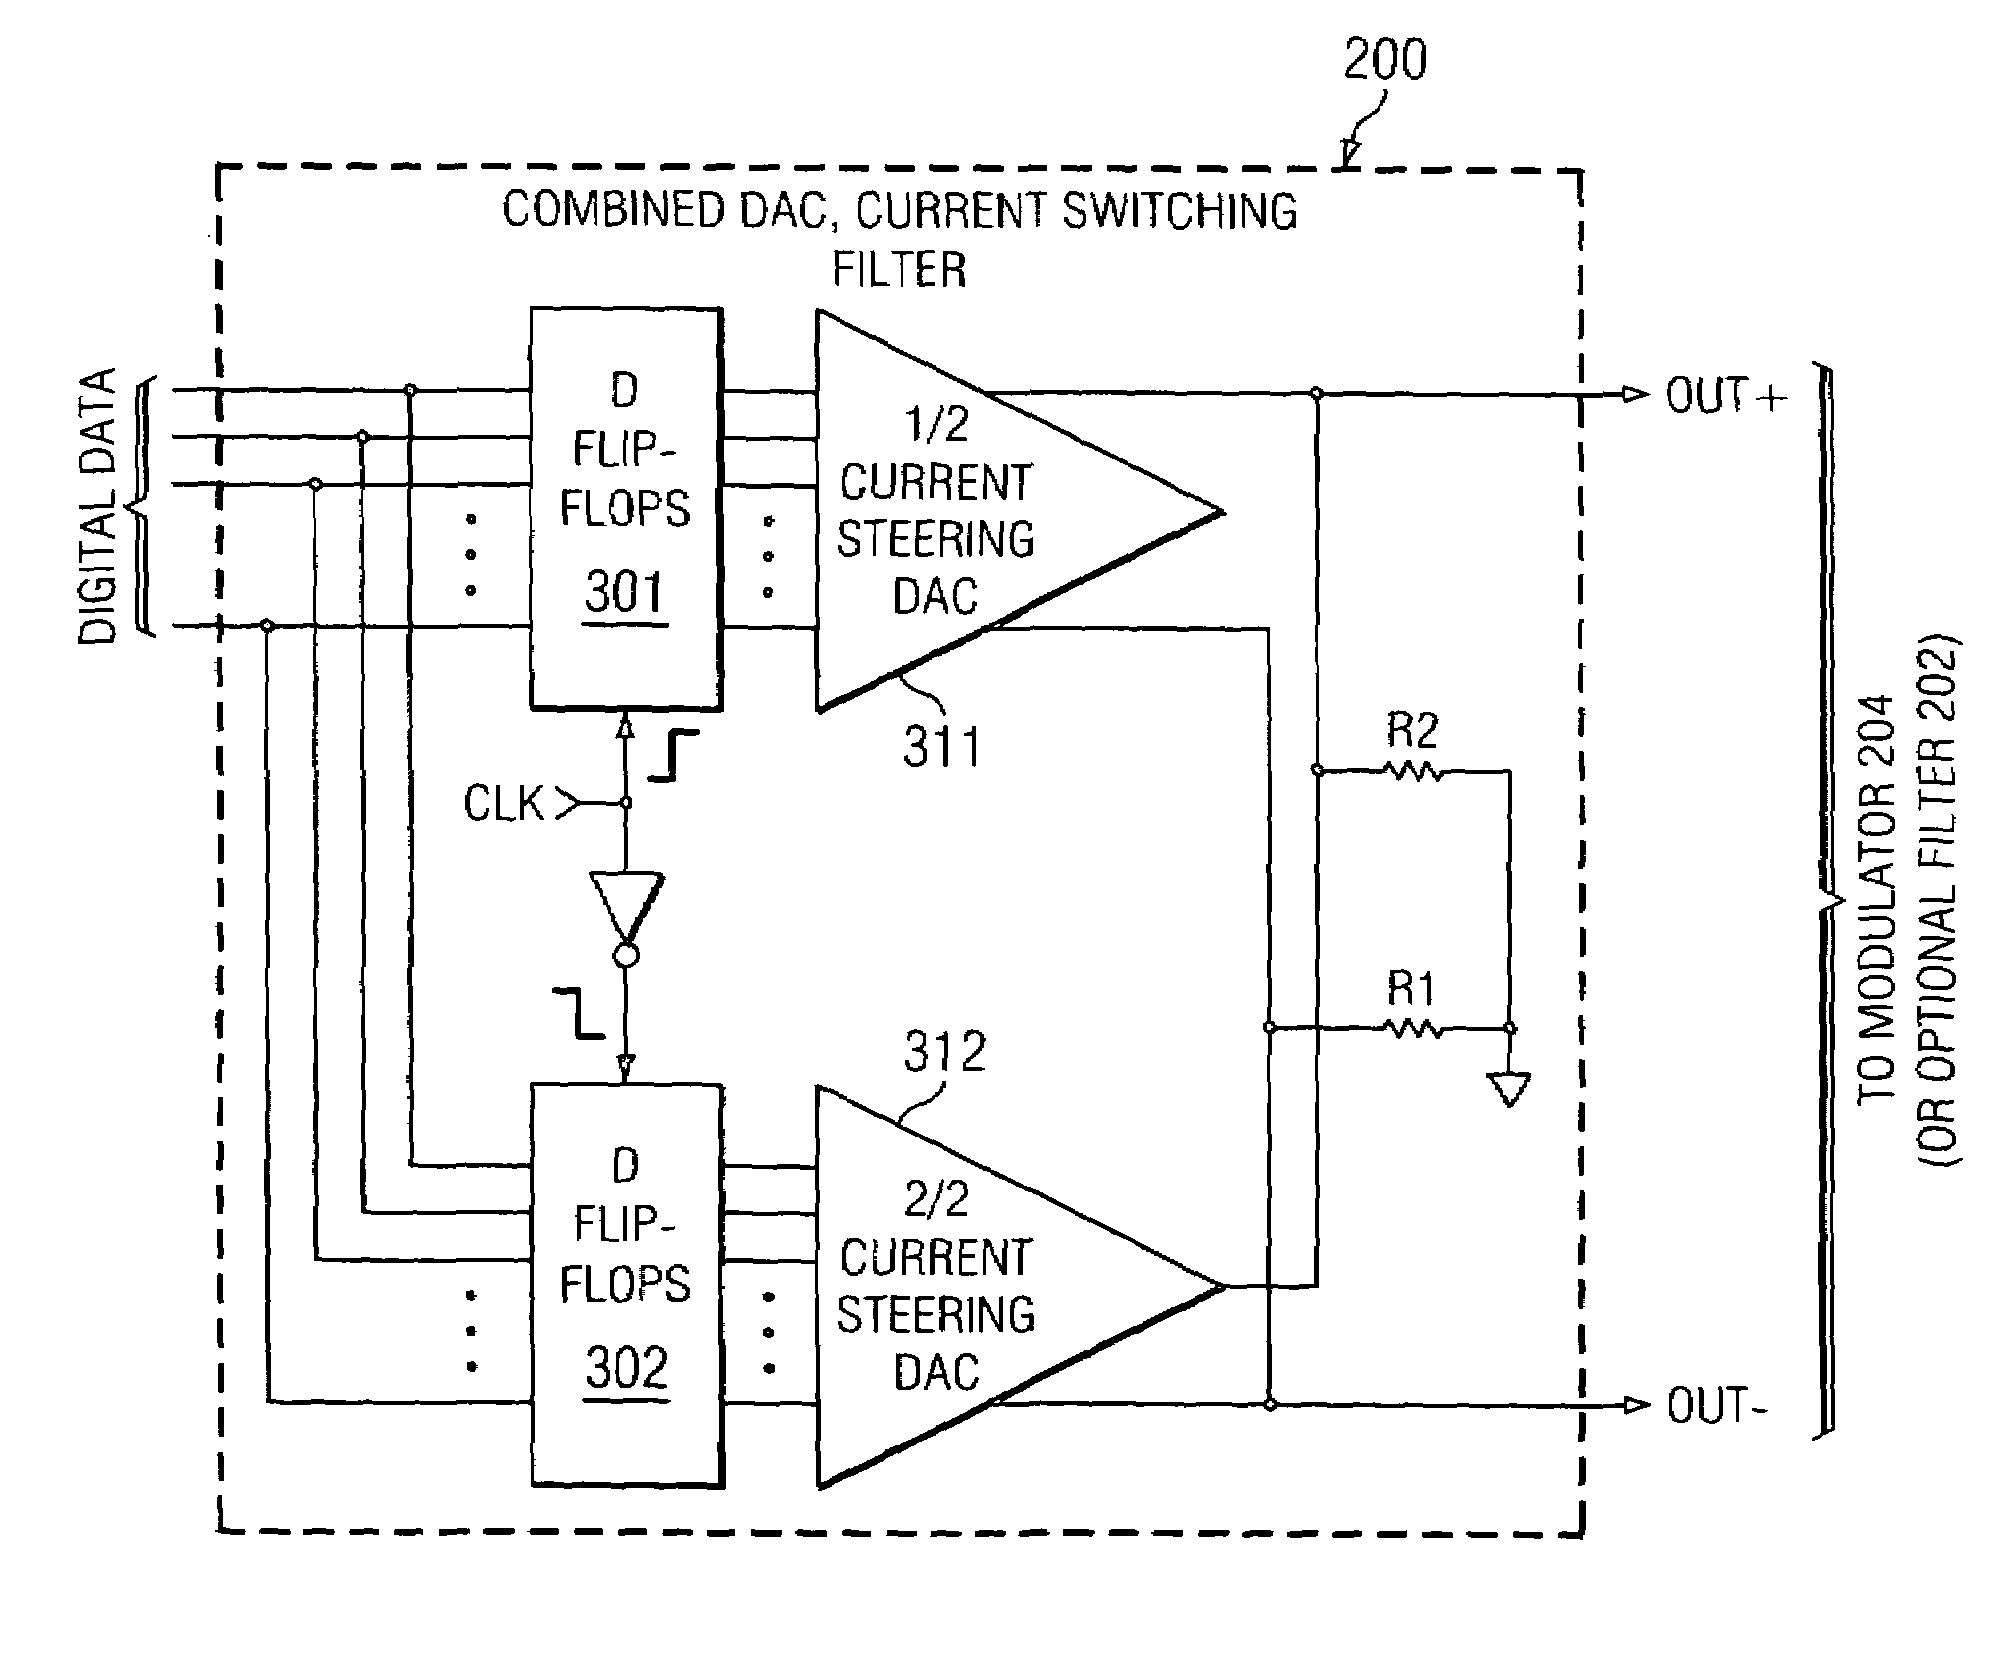 Current switching arrangement for D.A.C. reconstruction filtering